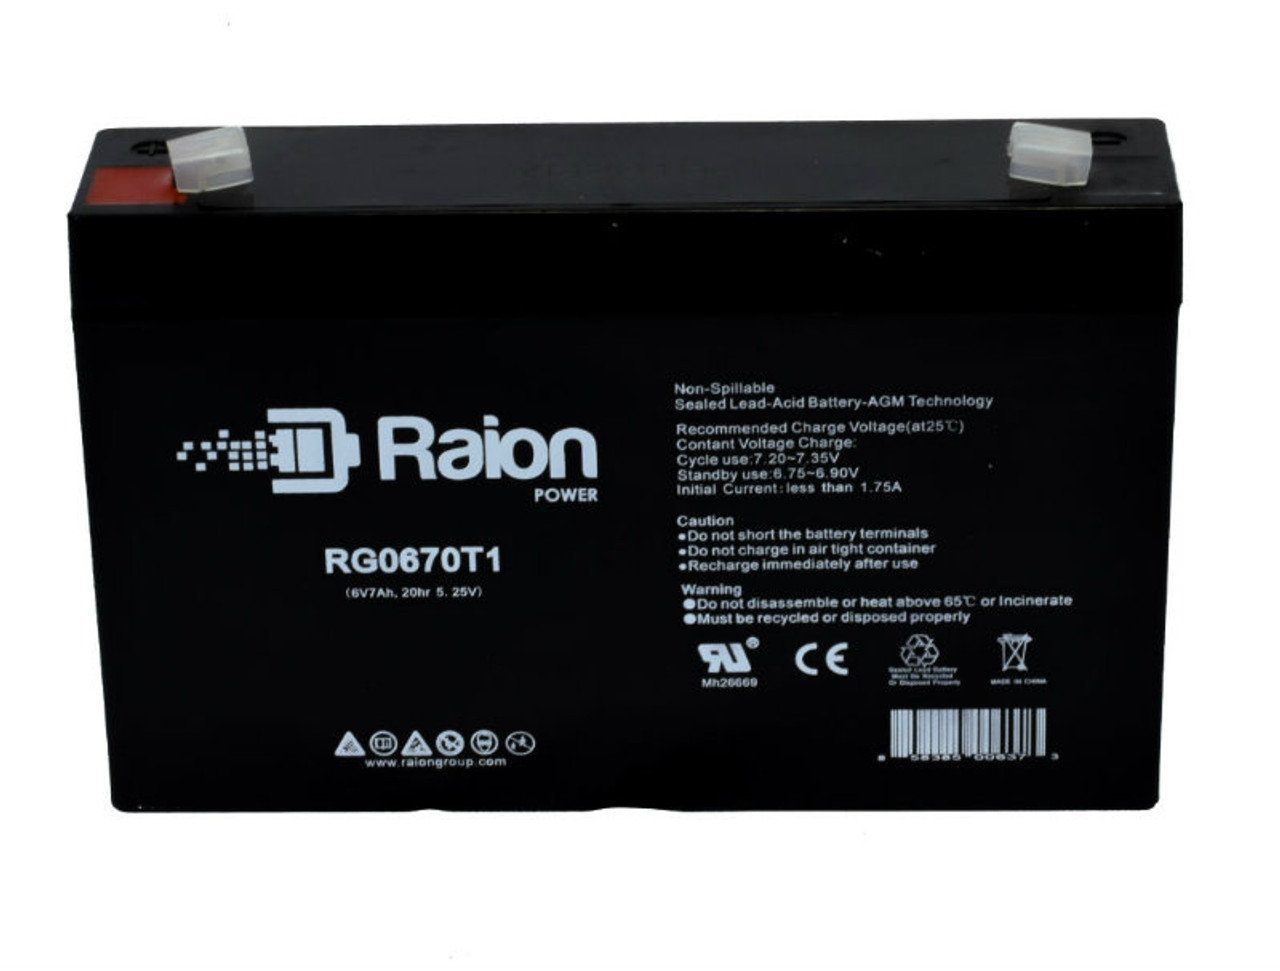 Raion Power RG0670T1 Replacement Battery Cartridge for Light Alarms 1ZV13